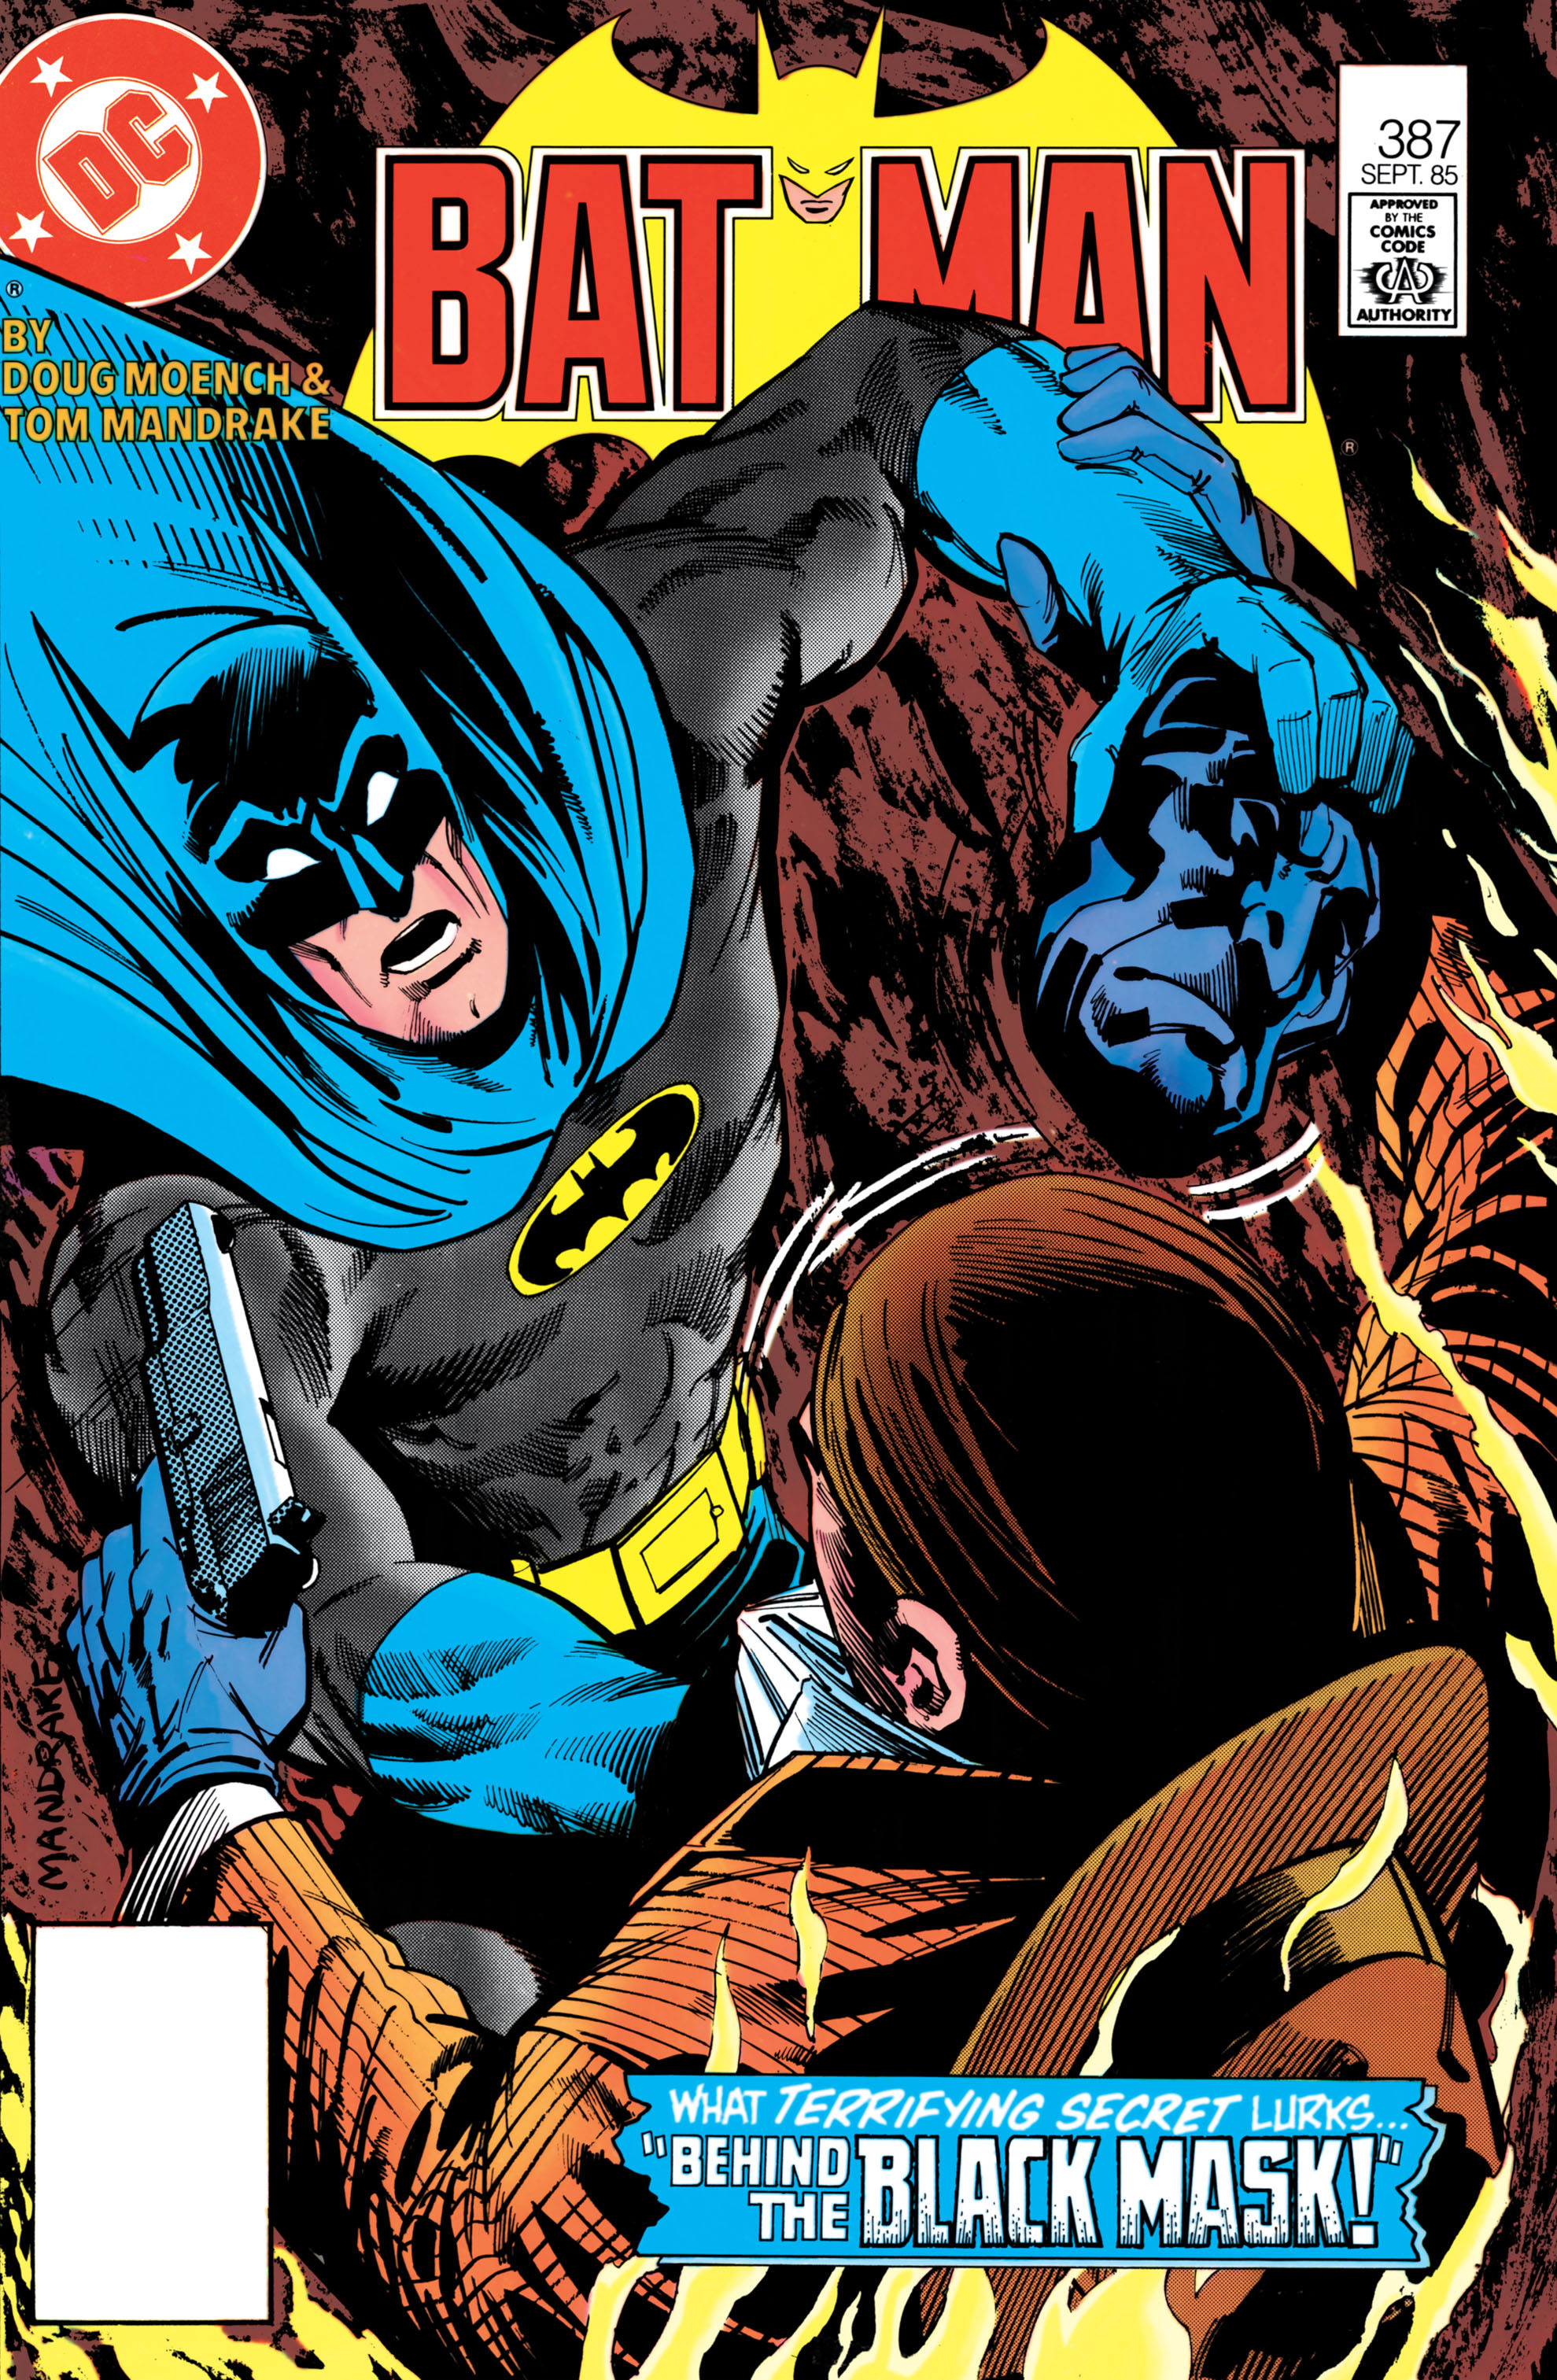 Batman 1940 Issue 387 | Read Batman 1940 Issue 387 comic online in high  quality. Read Full Comic online for free - Read comics online in high  quality .|